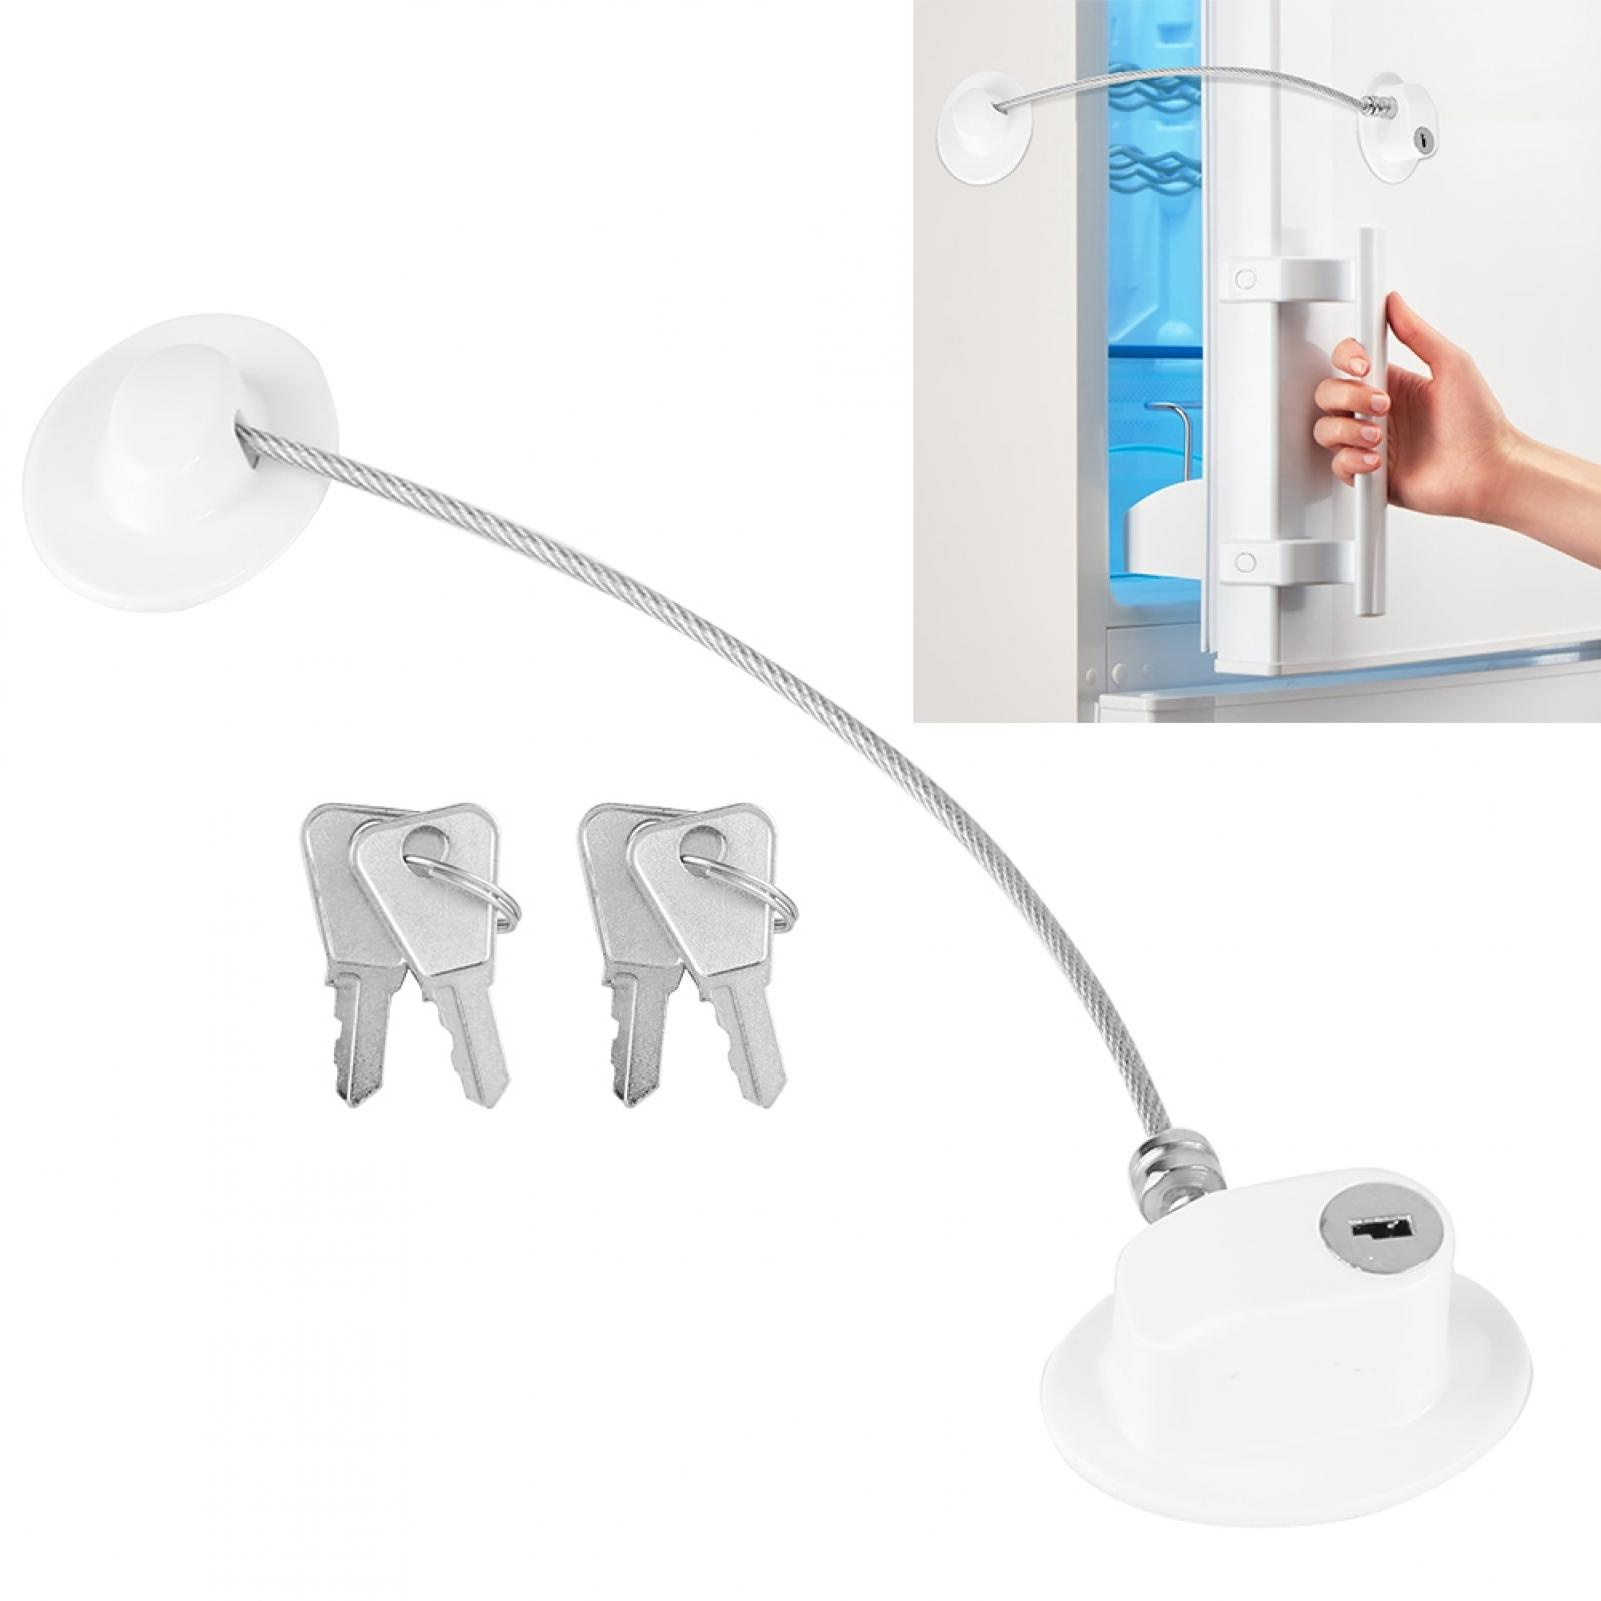 Amerteer Baby Safety Lock for Refrigerator, Window Stopper with Keys - image 1 of 7